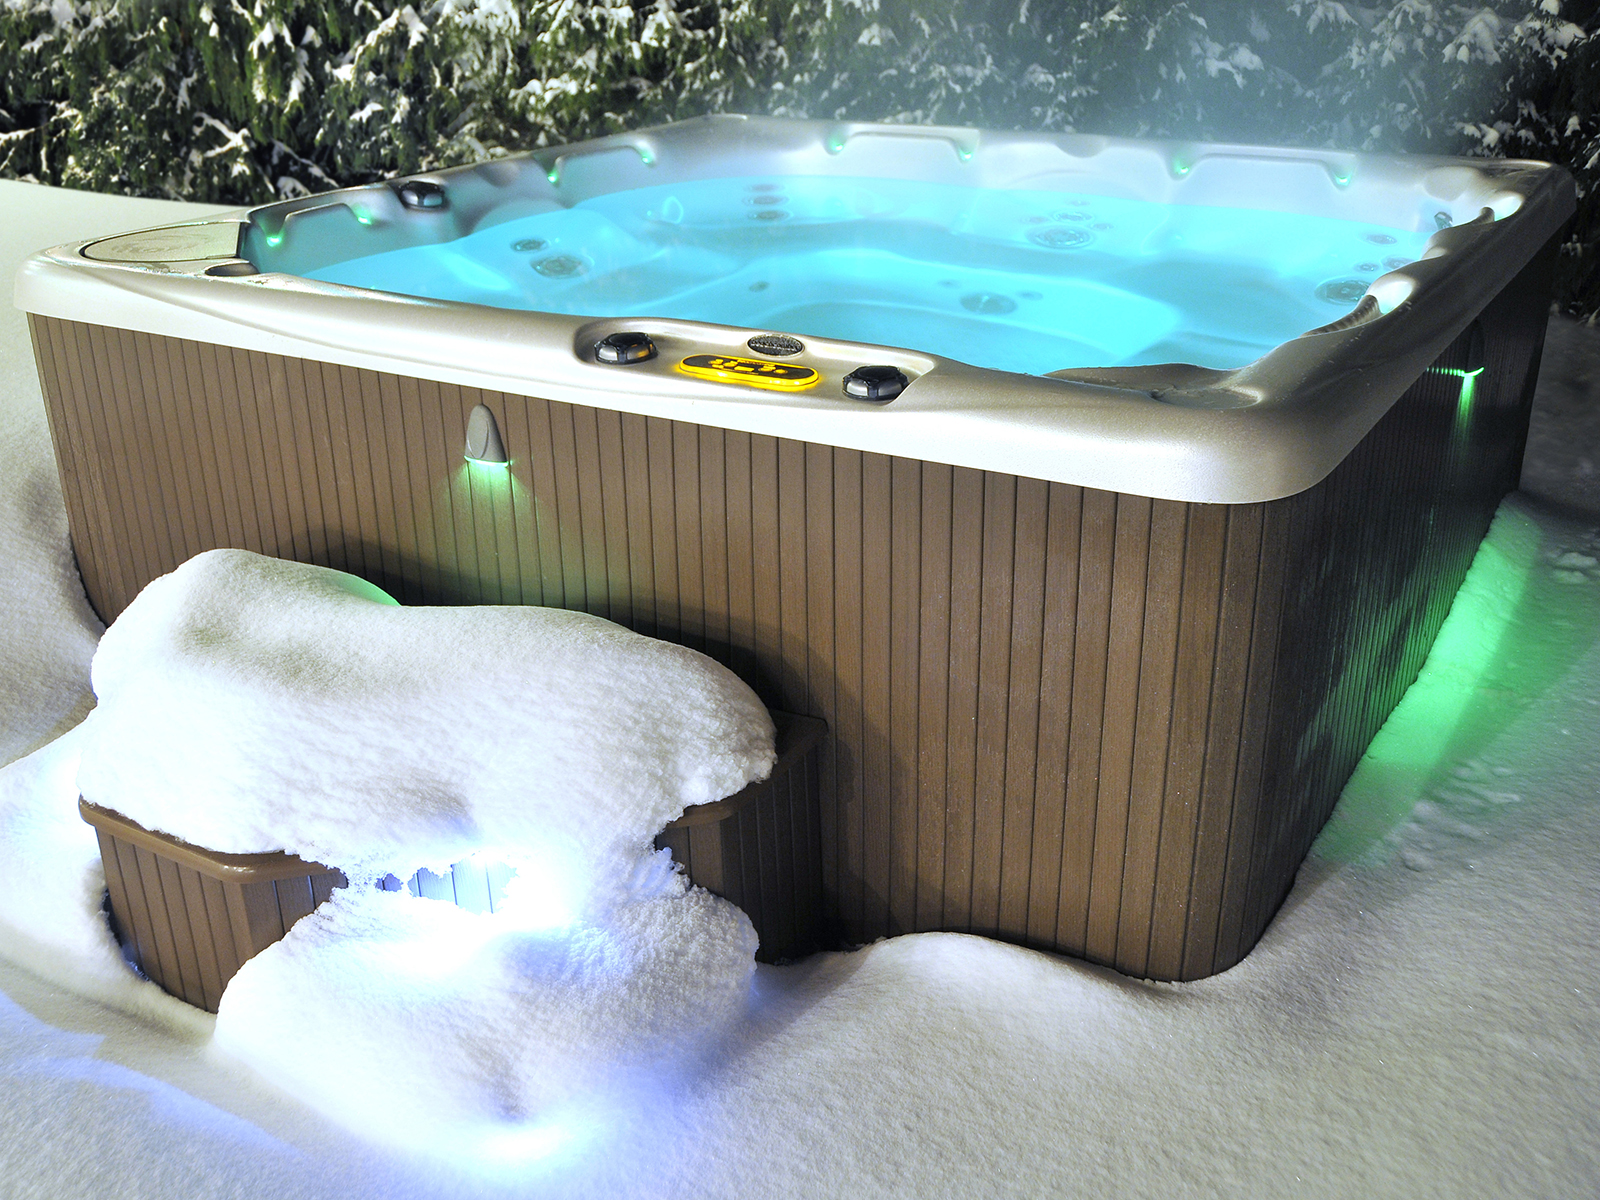 Beachcomber Hot Tub Covered in Snow